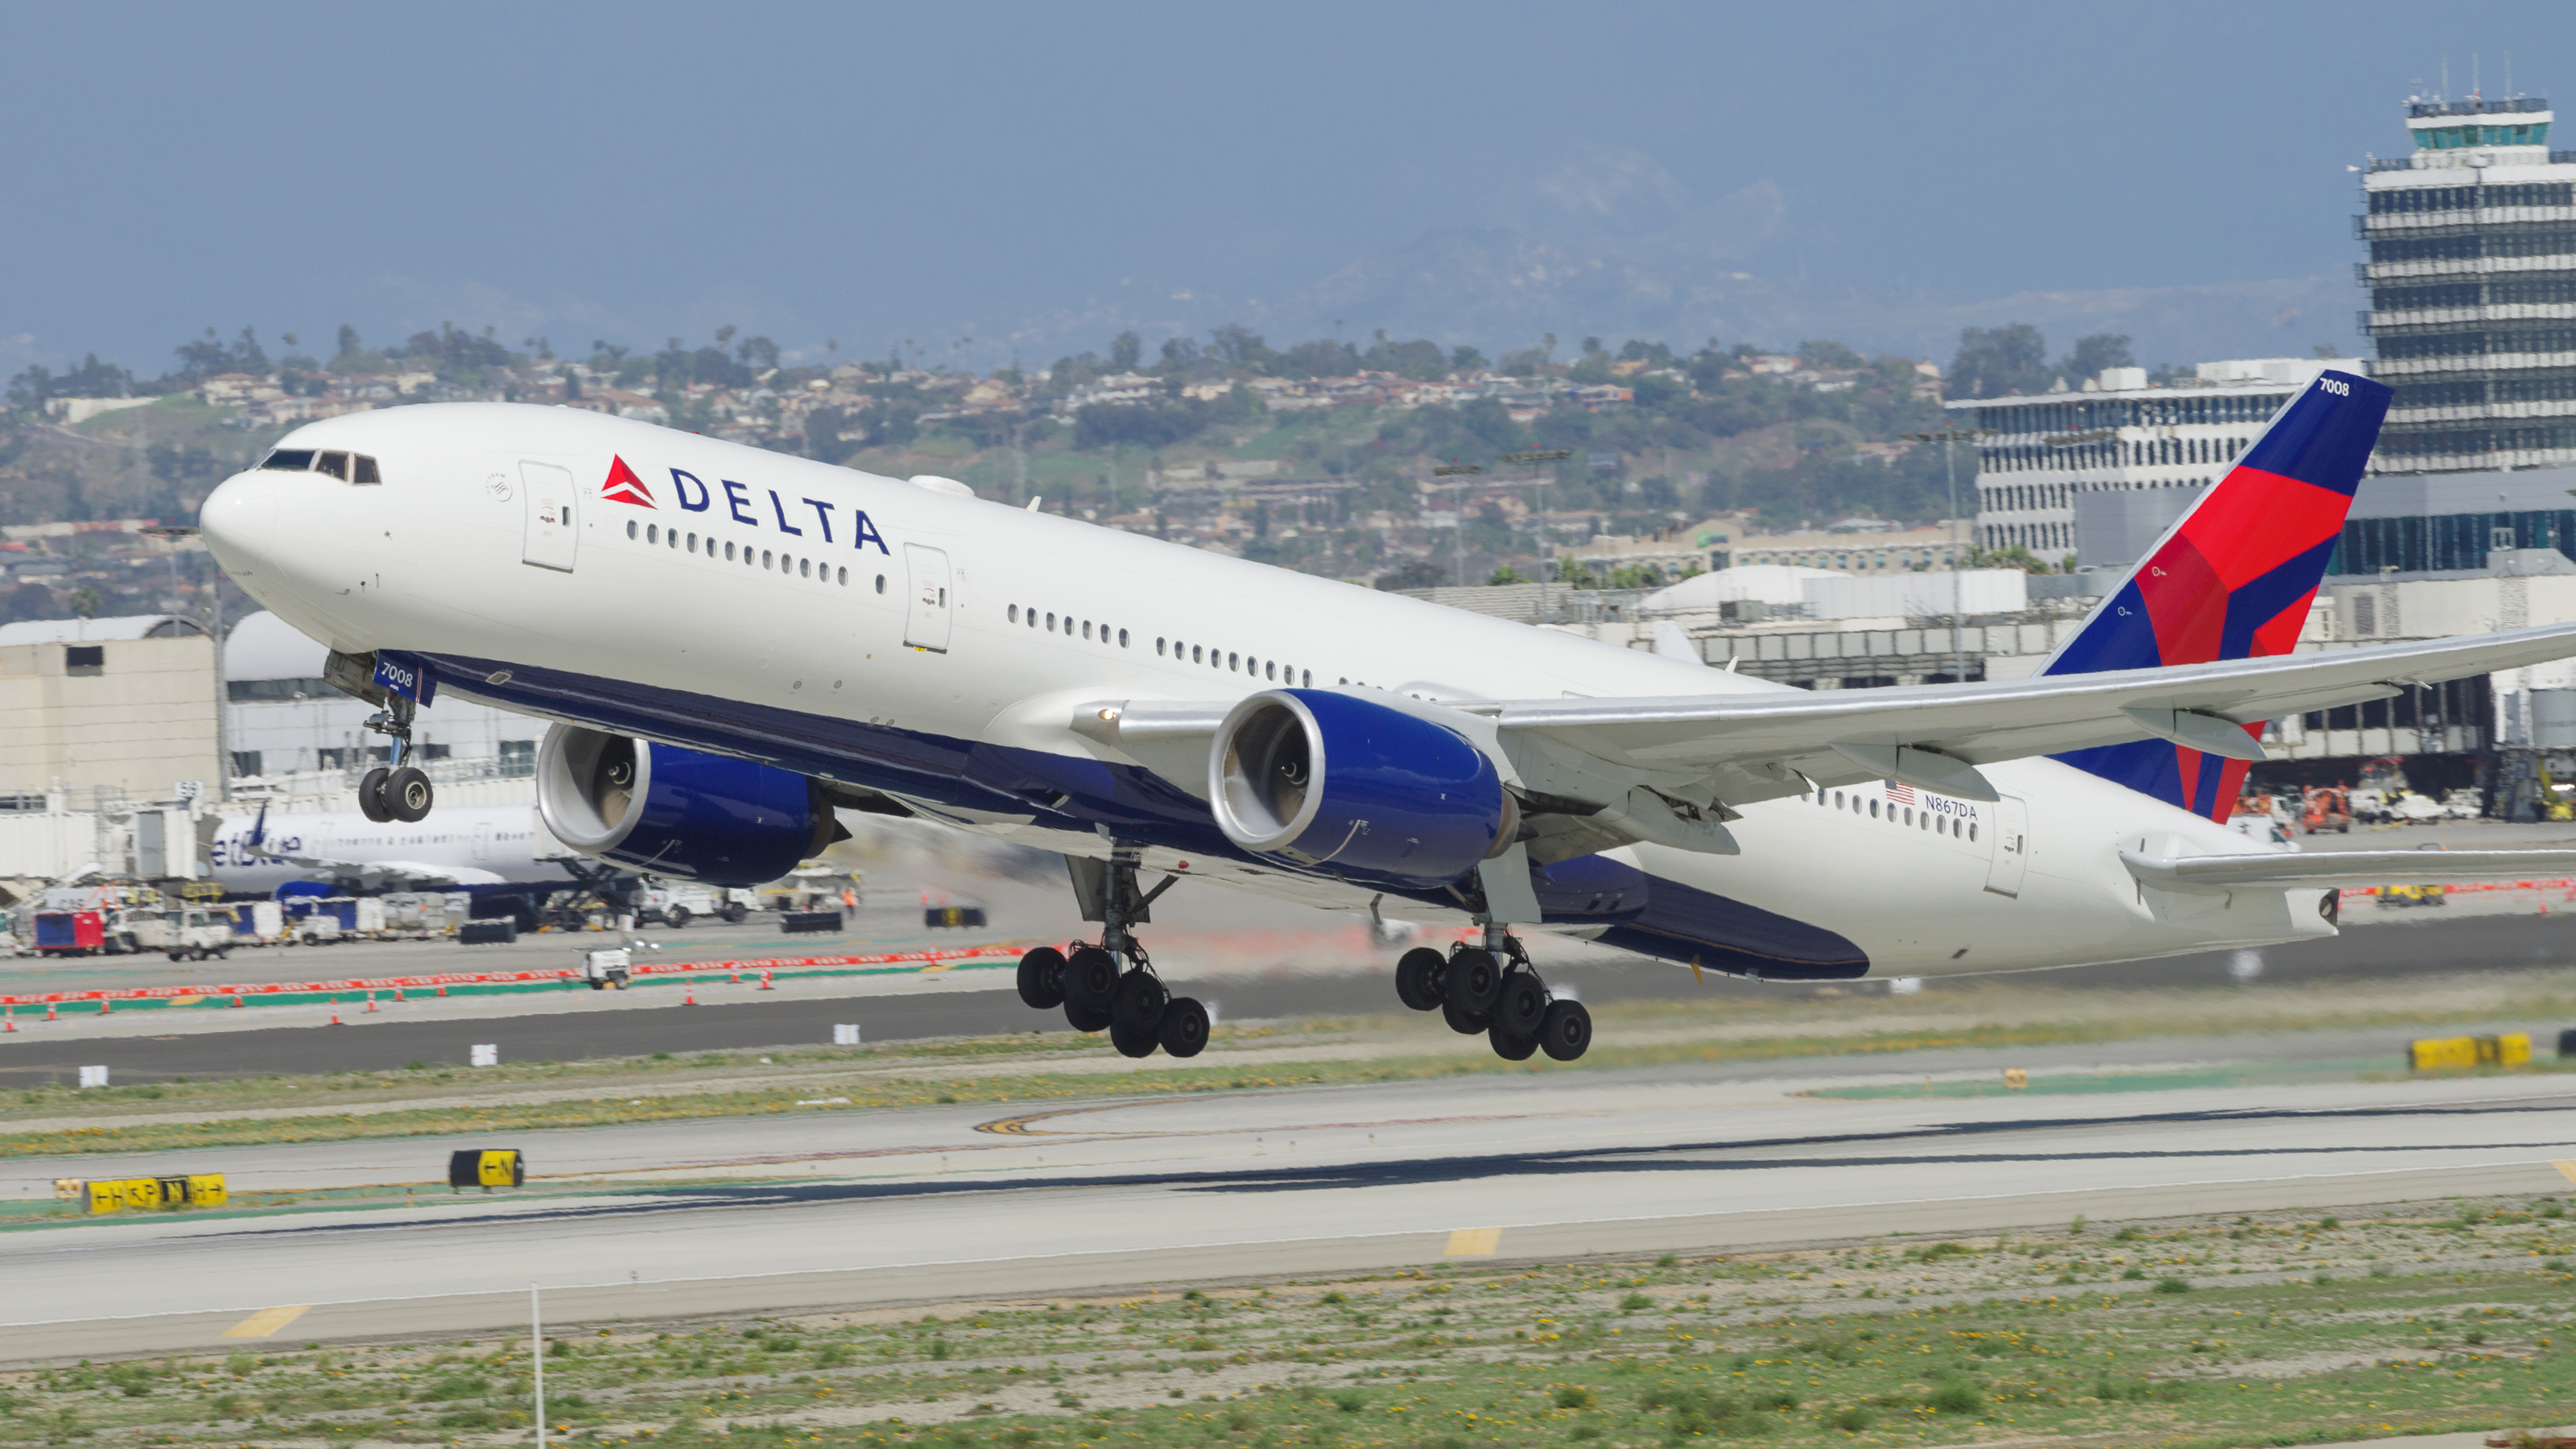 Does Delta American Express Have Travel Insurance / Delta Skymiles